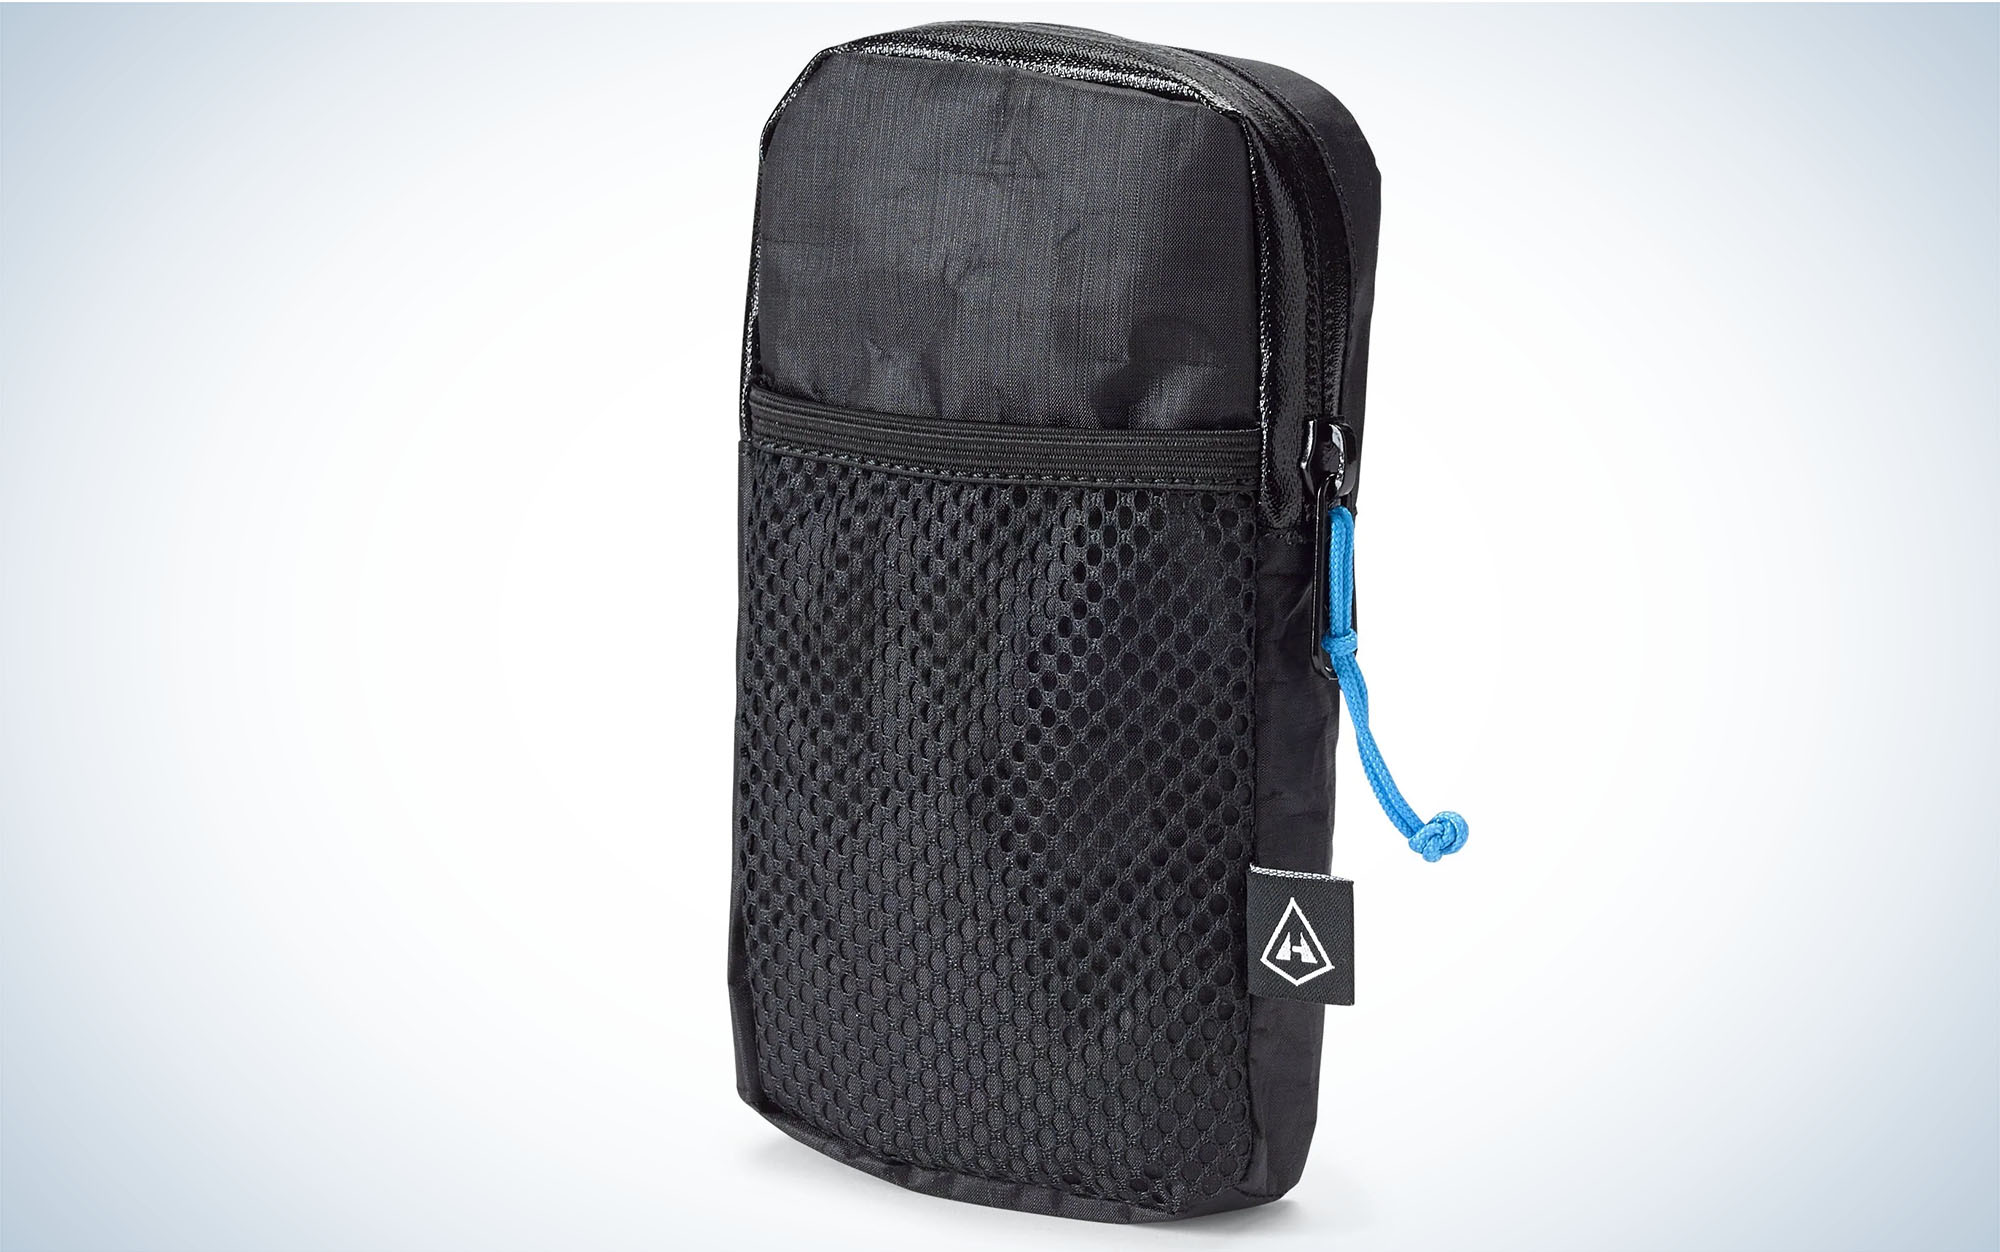 The Hyperlite Mountain Gear Phone Pouch is the best ultralight backpack add-on.